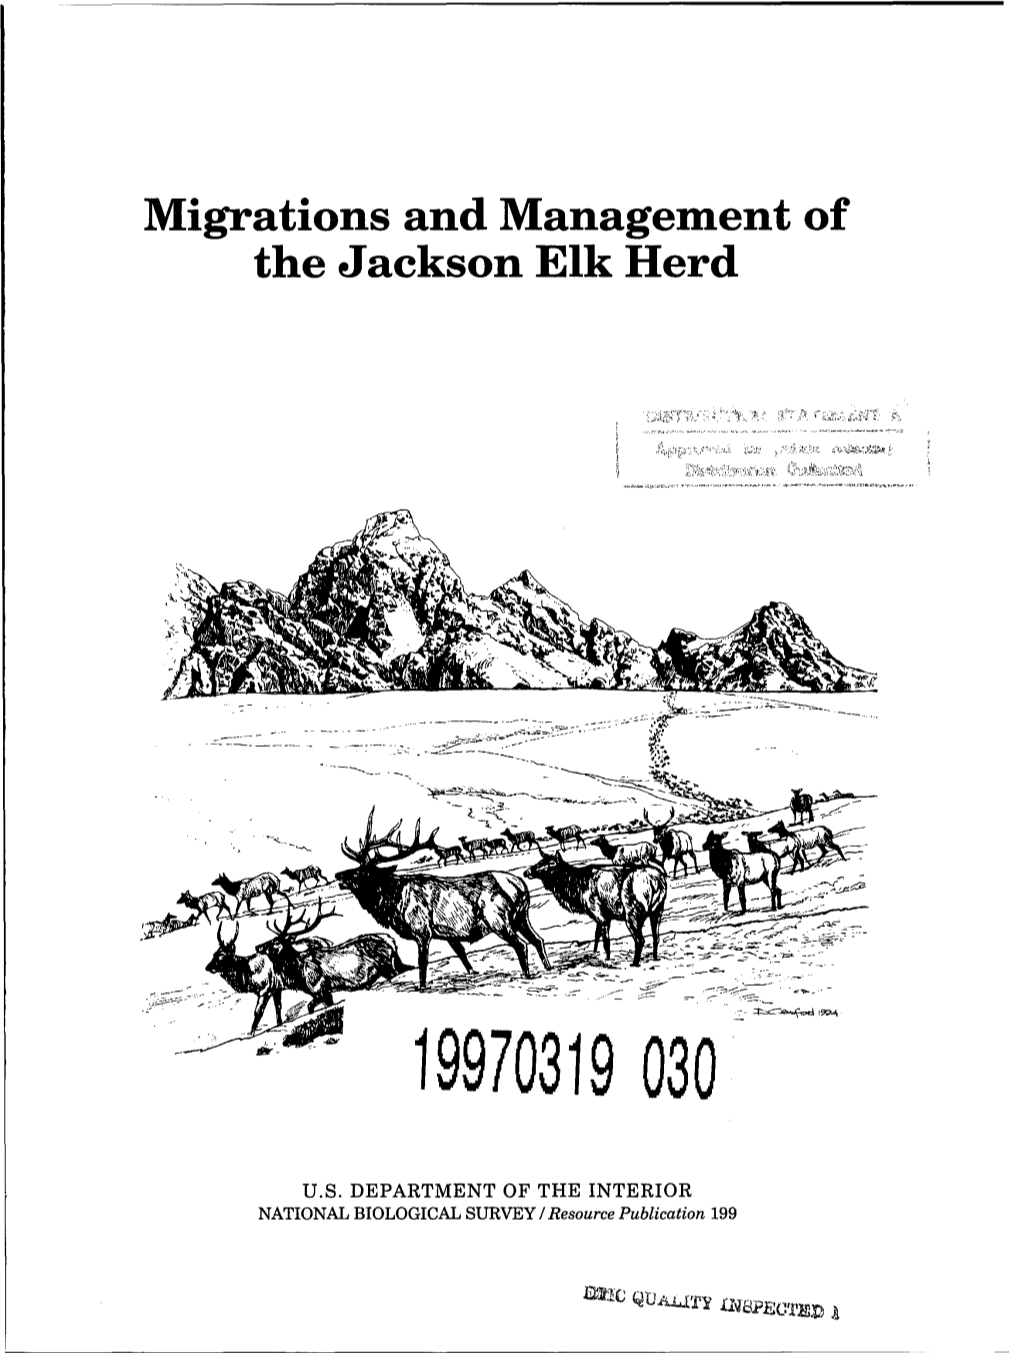 Migrations and Management of the Jackson Elk Herd